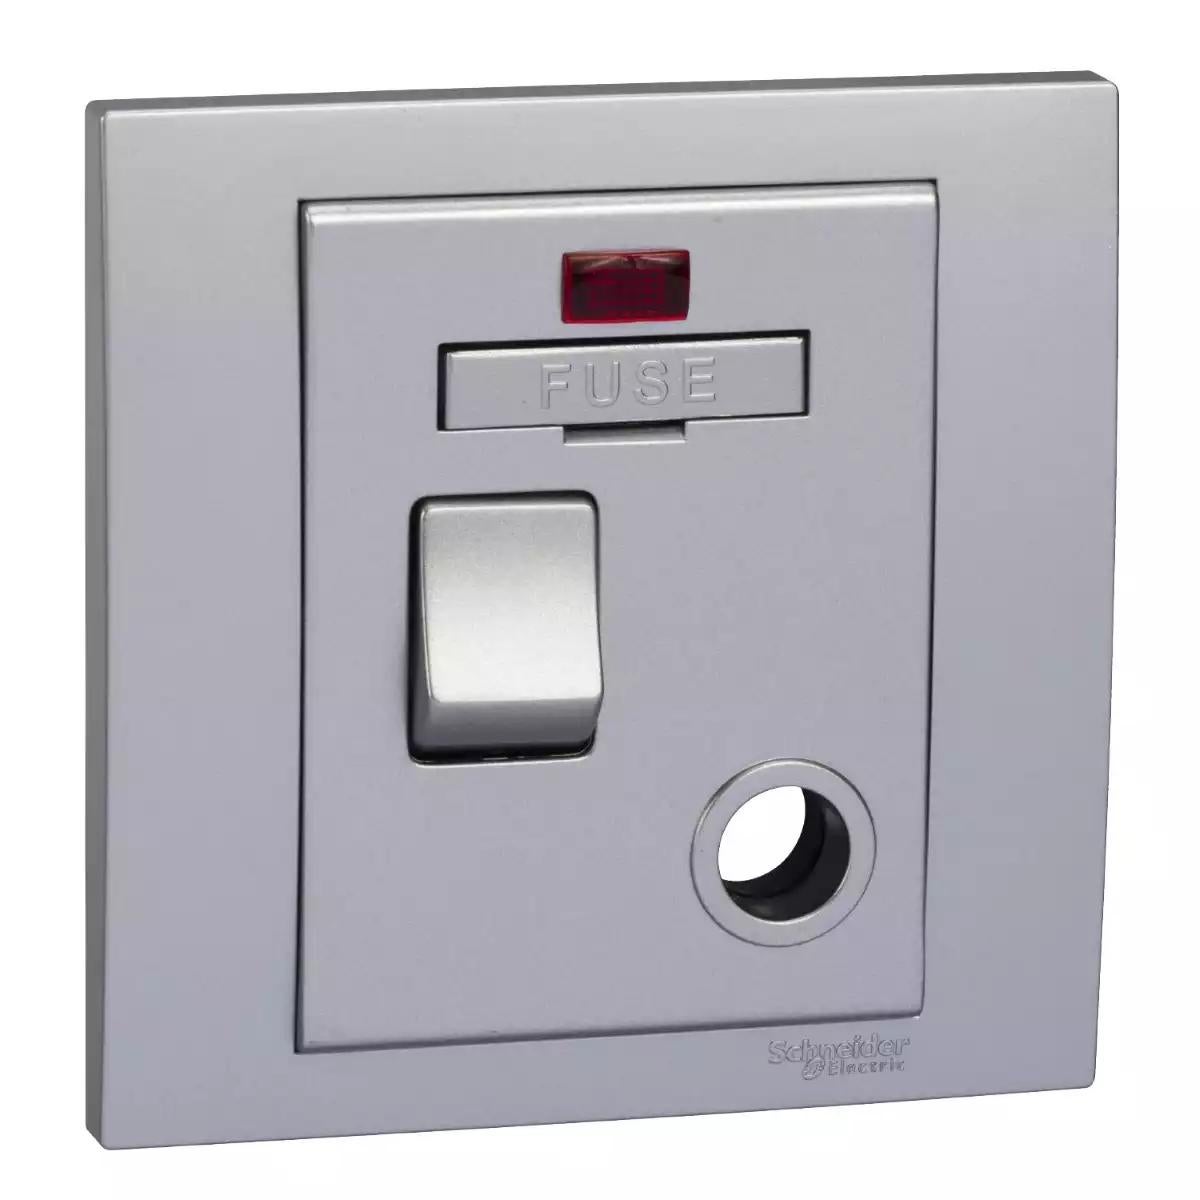 Vivace - switched fuse mechanism - 13 A 250 V - aluminium silver